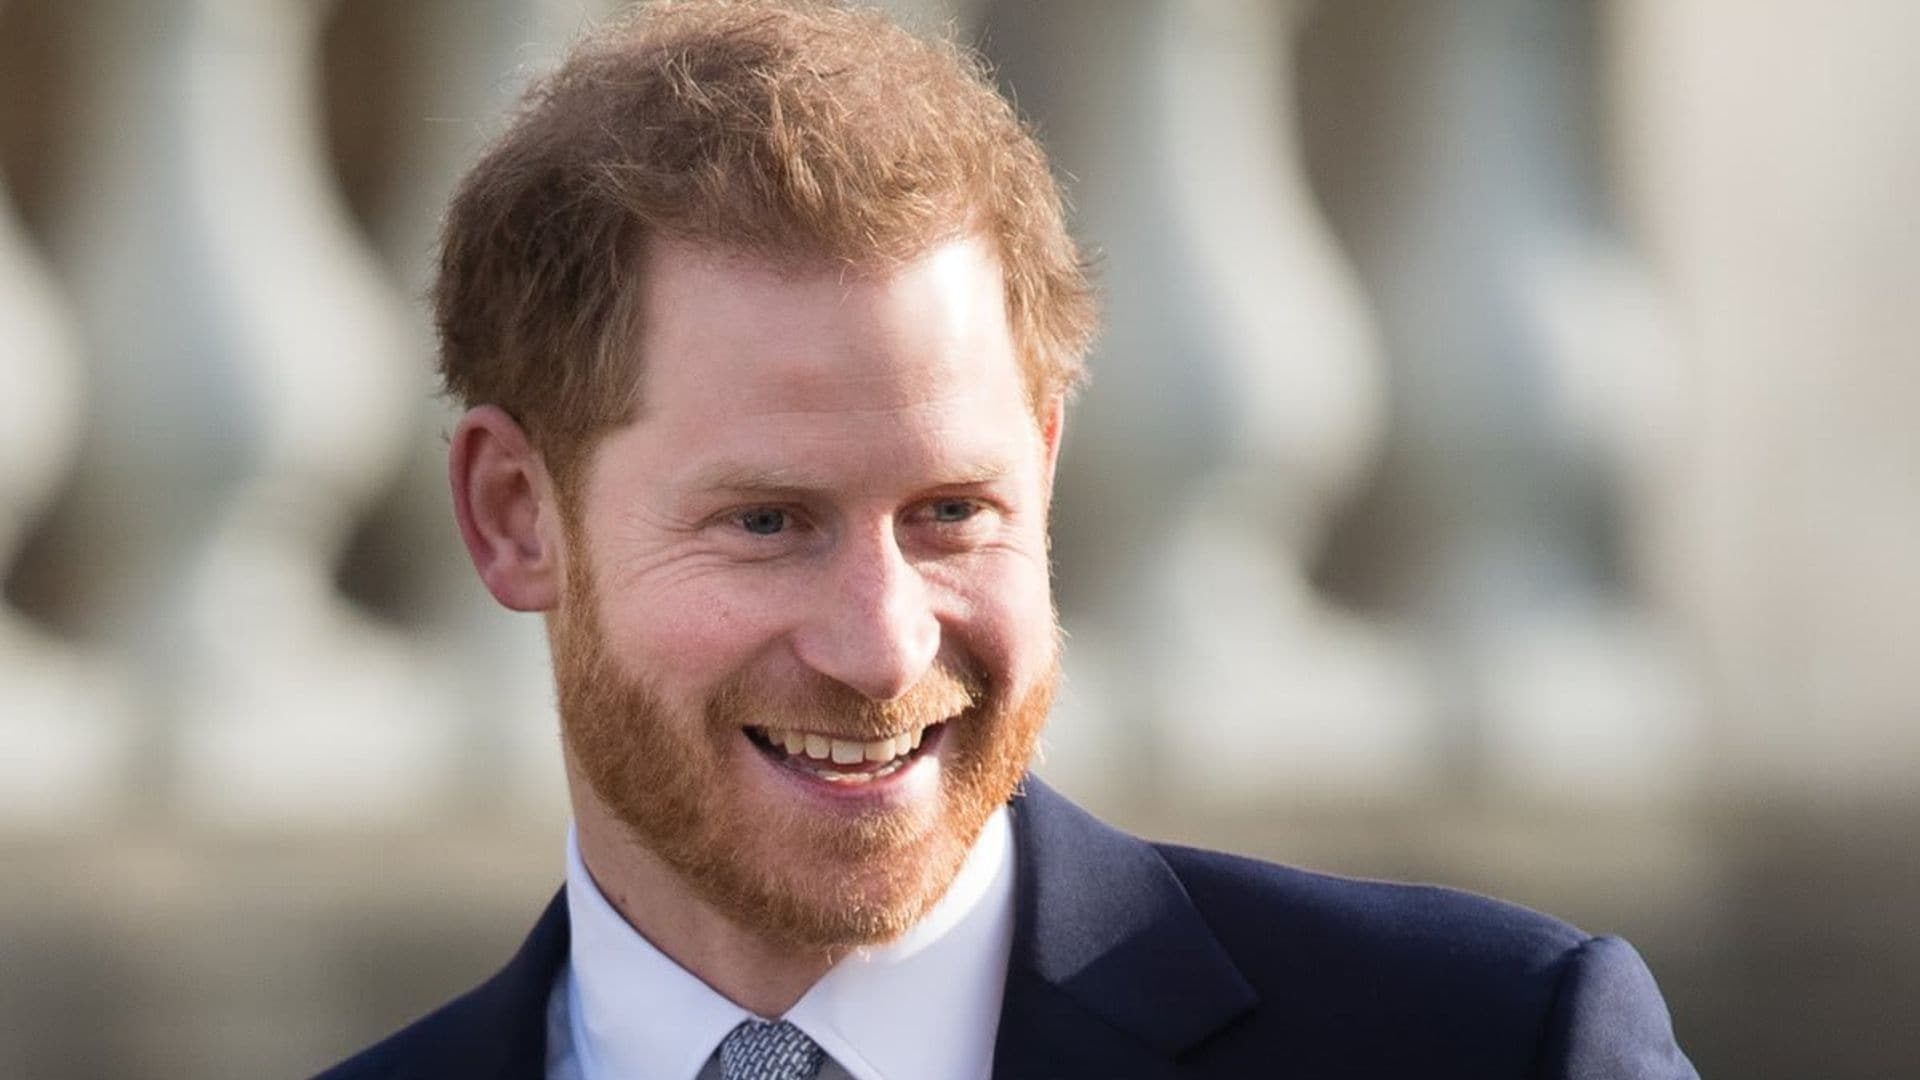 Prince Harry makes surprise virtual appearance in a tuxedo